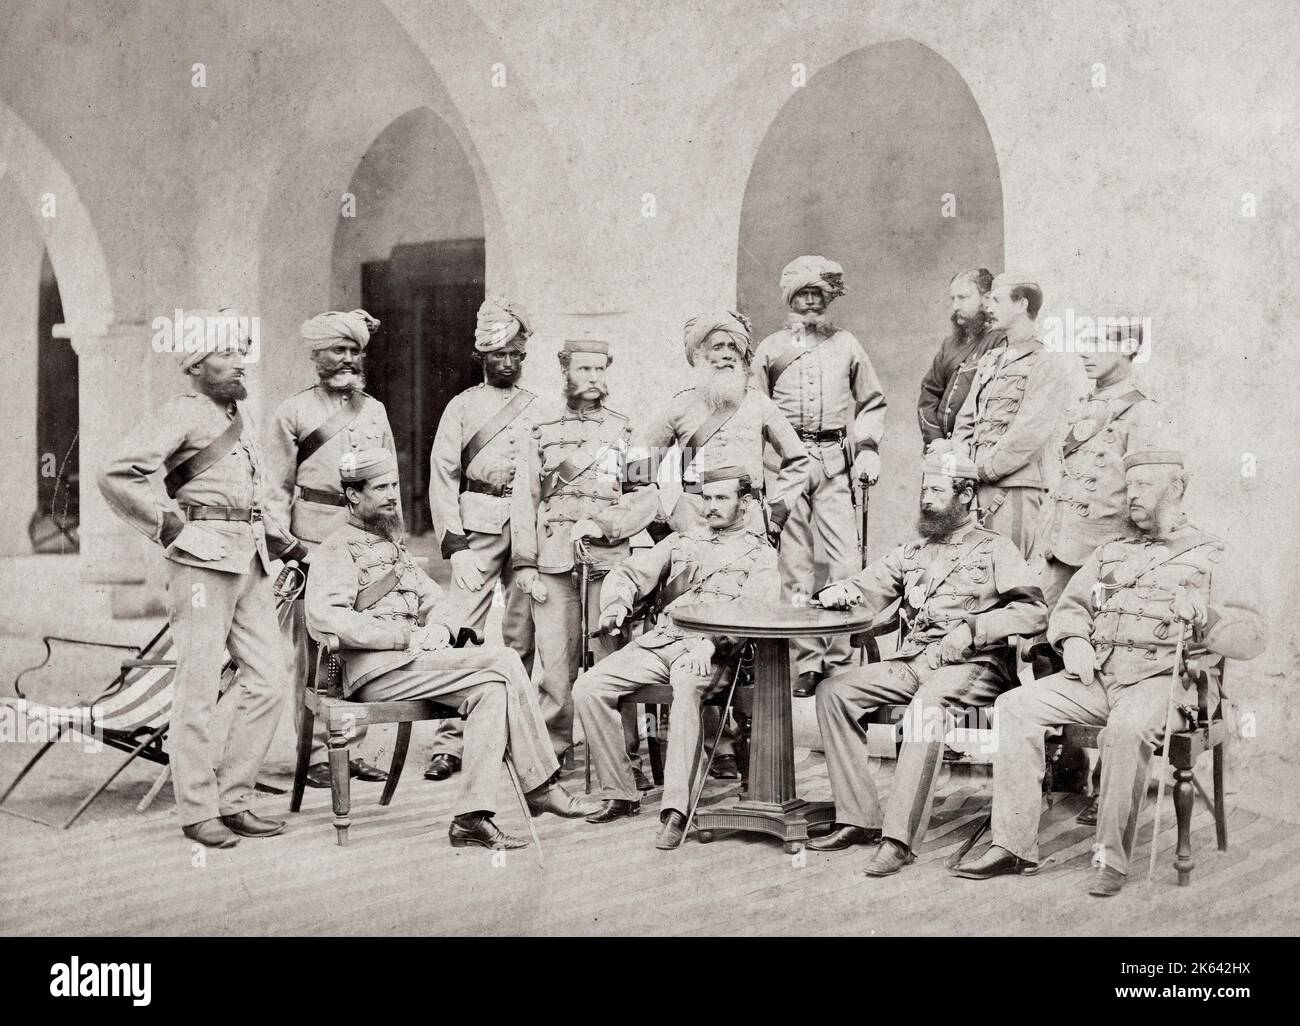 Vintage 19th century photograph - British army in India, 1860s - officers of the 1st Punjab Infantry 1866 Stock Photo